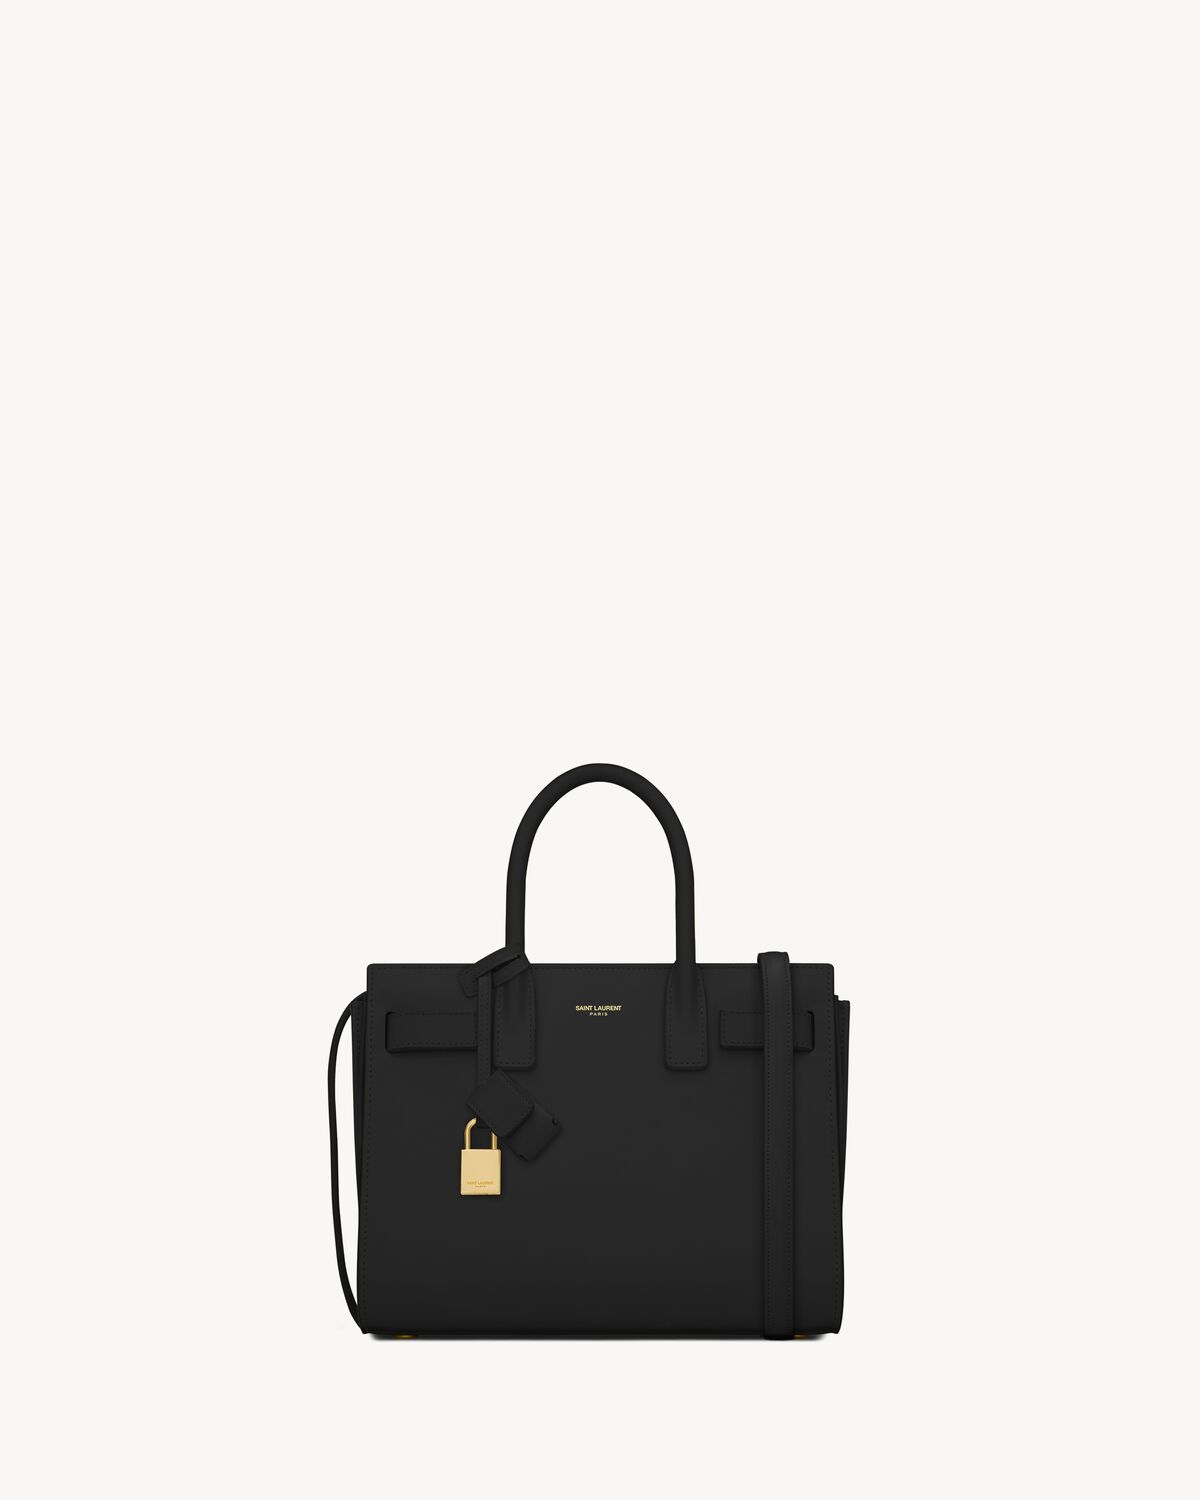 SAC DE JOUR BABY IN SMOOTH LEATHER